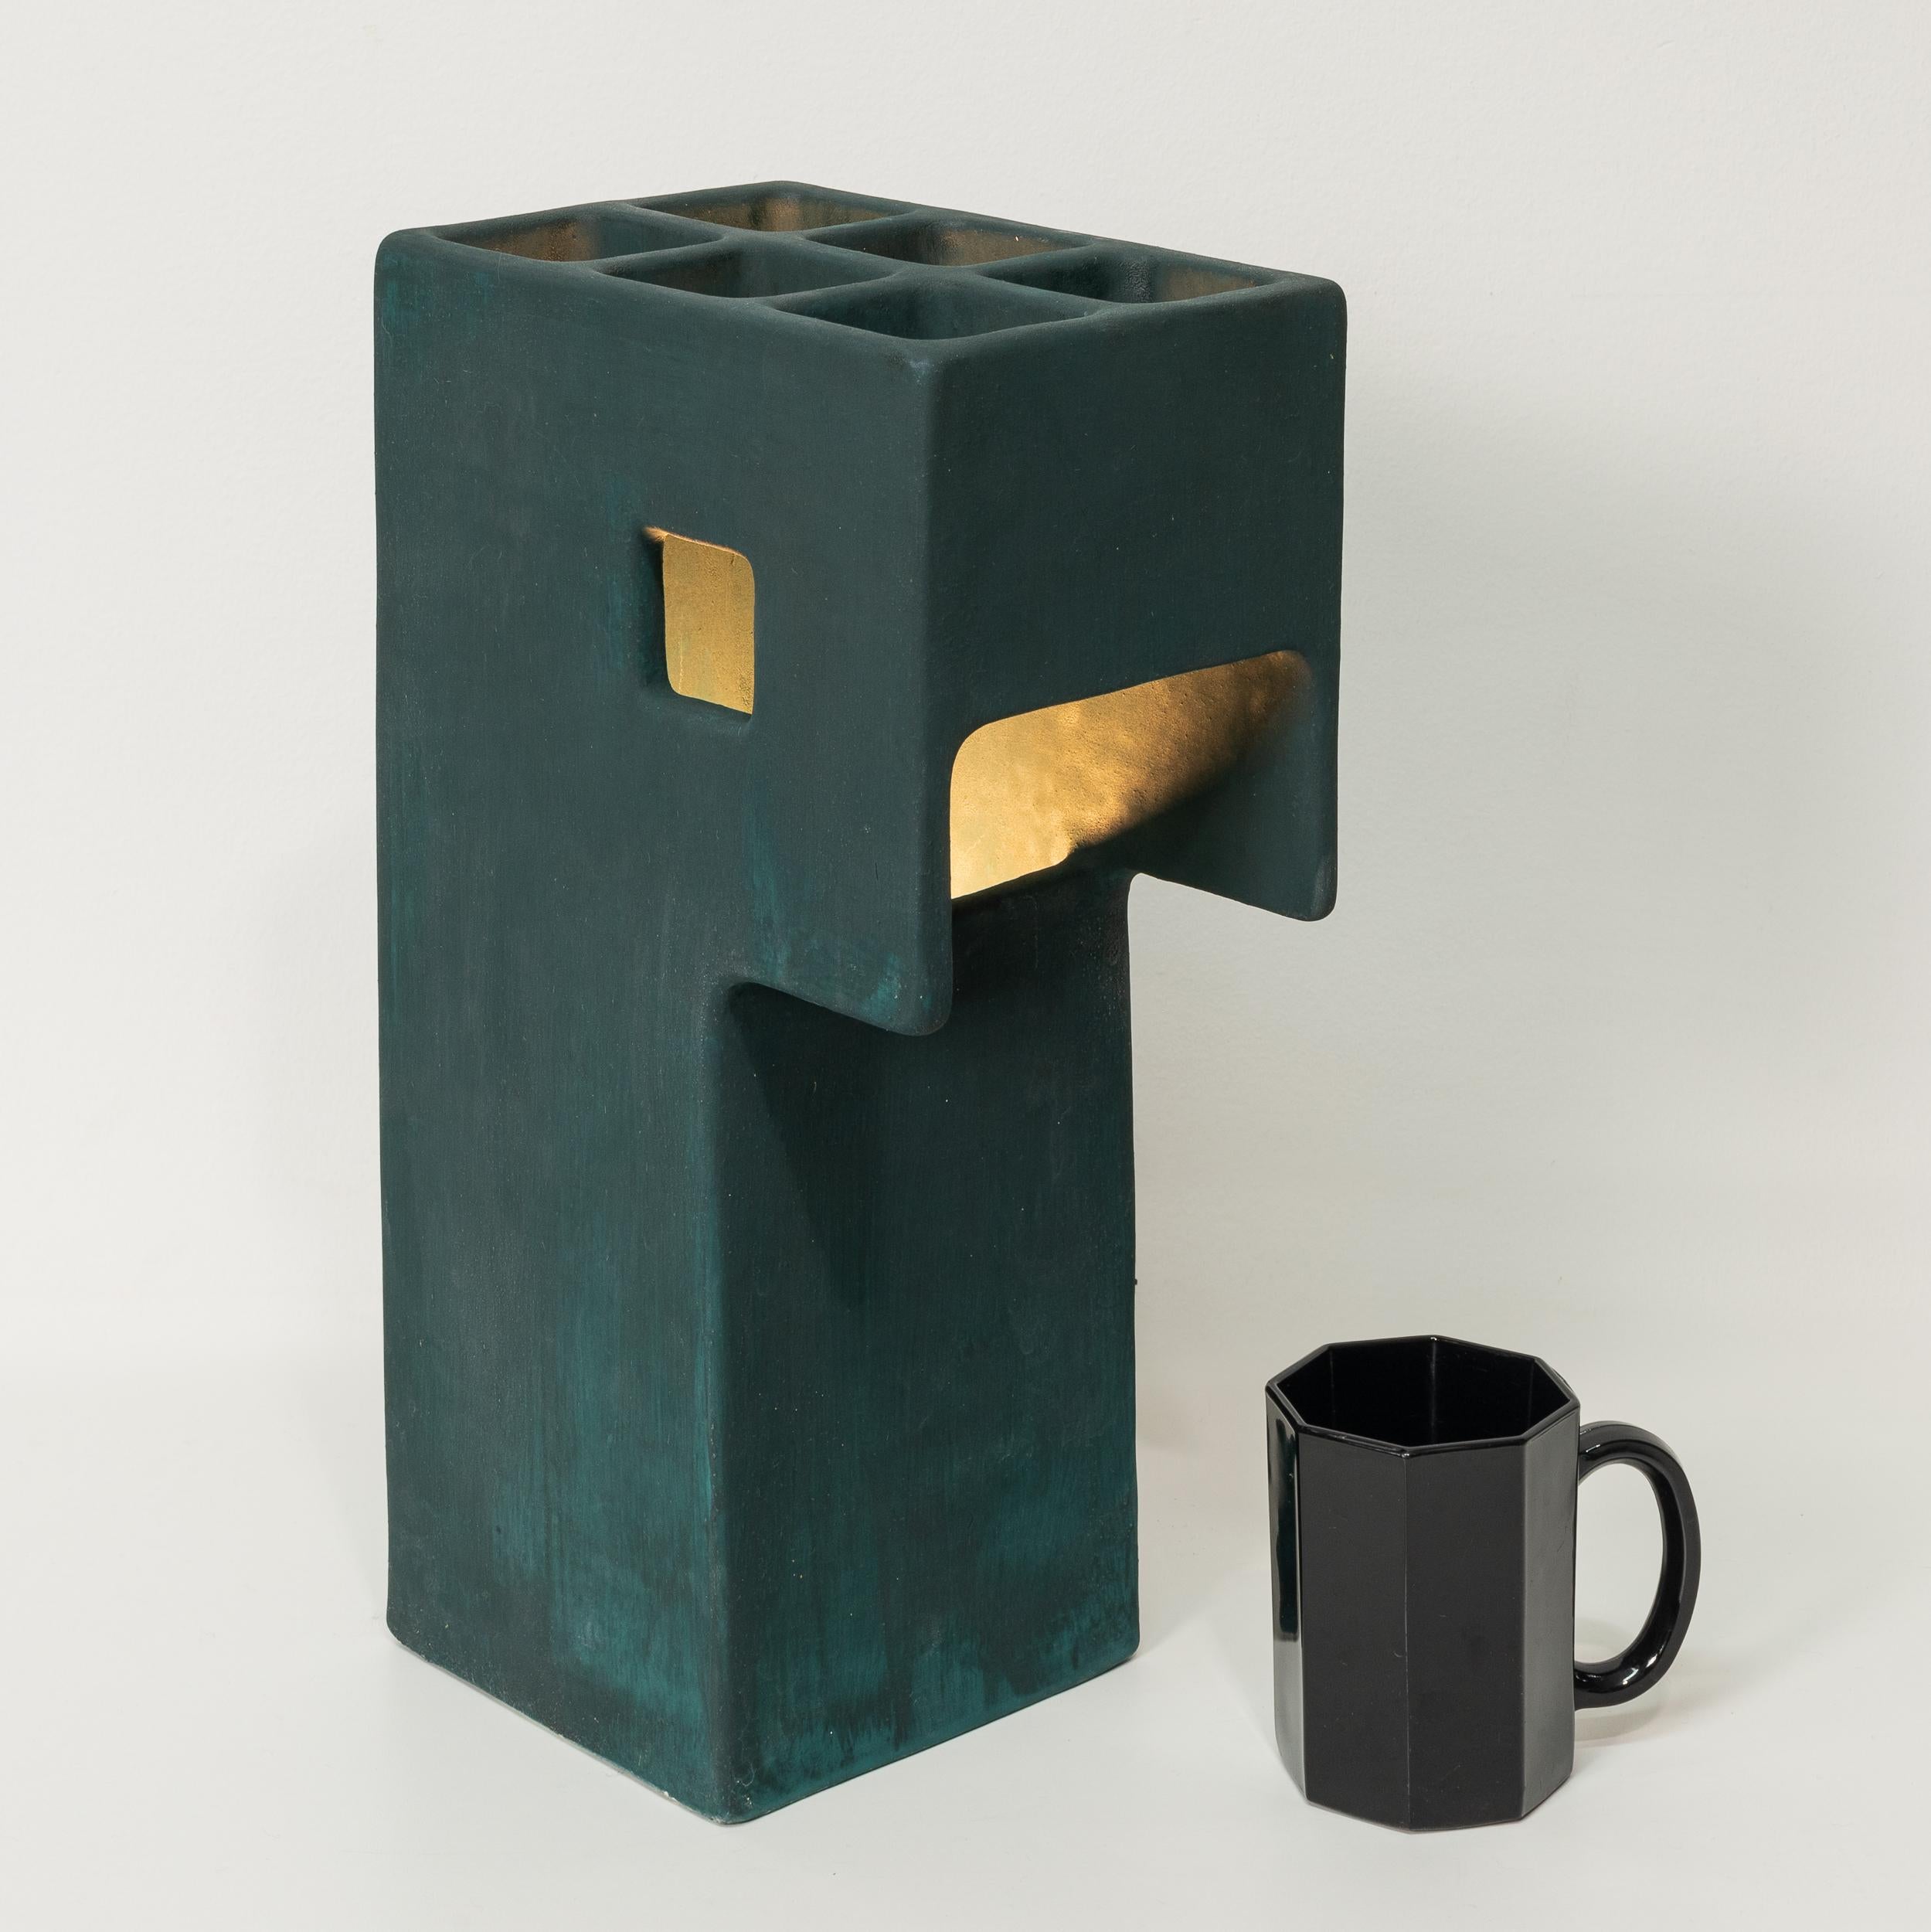 American Ding Dong Table Lamp by Luft Tanaka, ceramic, dark green, brutalist, geometric For Sale